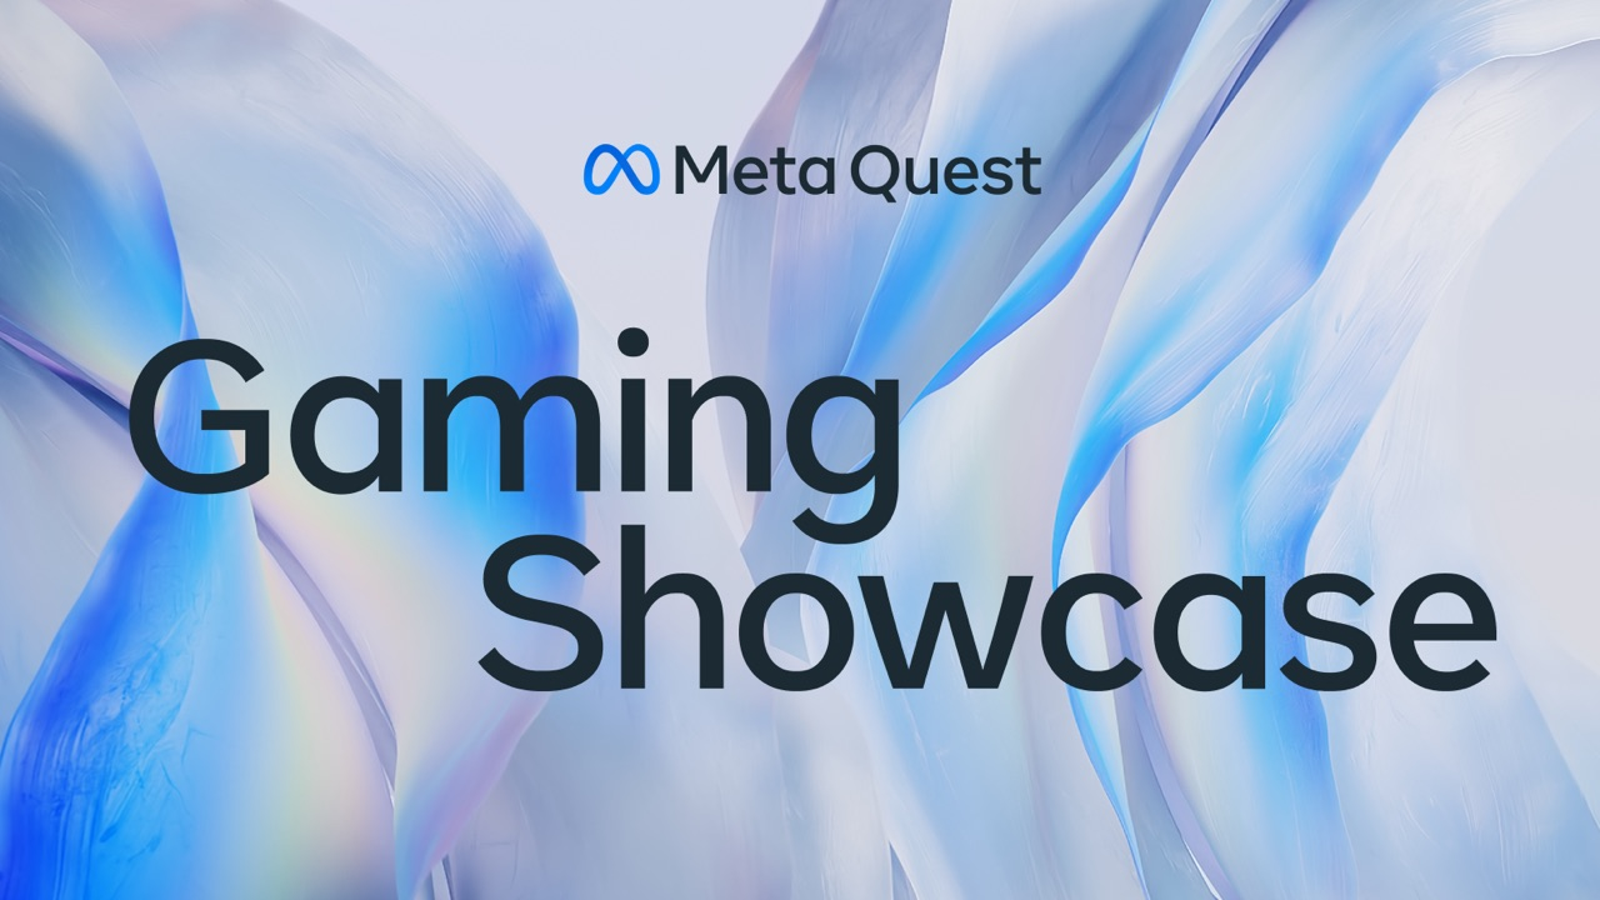 PowerWash Simulator is out now on #MetaQuest 2, 3 and pro